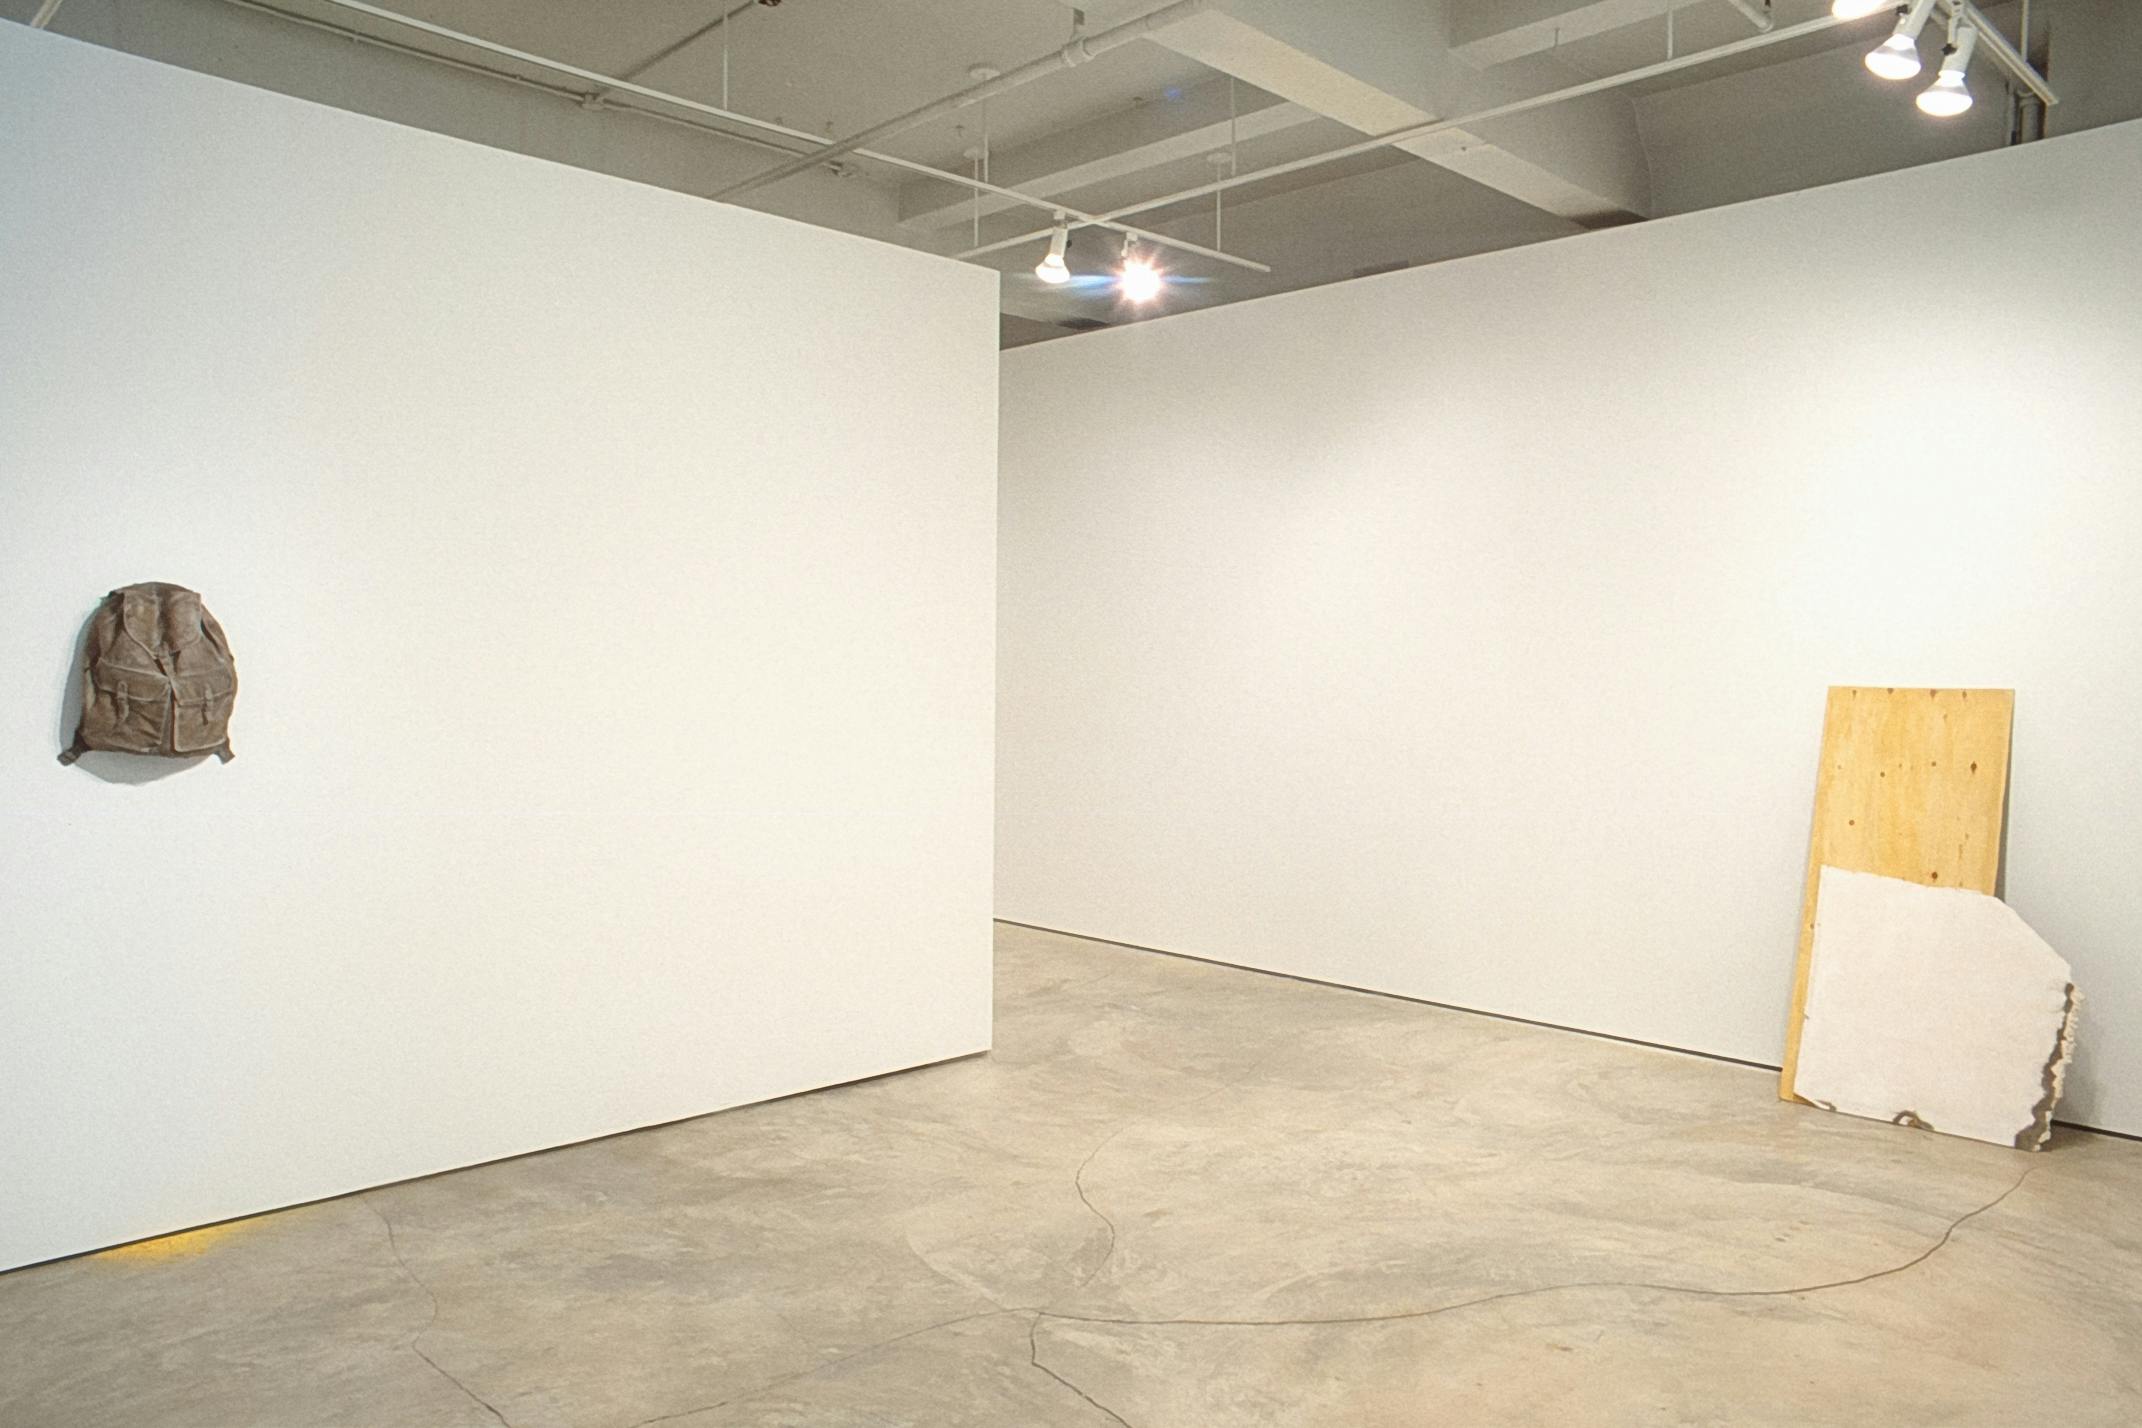 Two artworks are installed in the gallery space. One is a closed backpack with yellow paint scattered beneath where it is mounted. Thick paper and a piece of wood are leaning against the other wall.